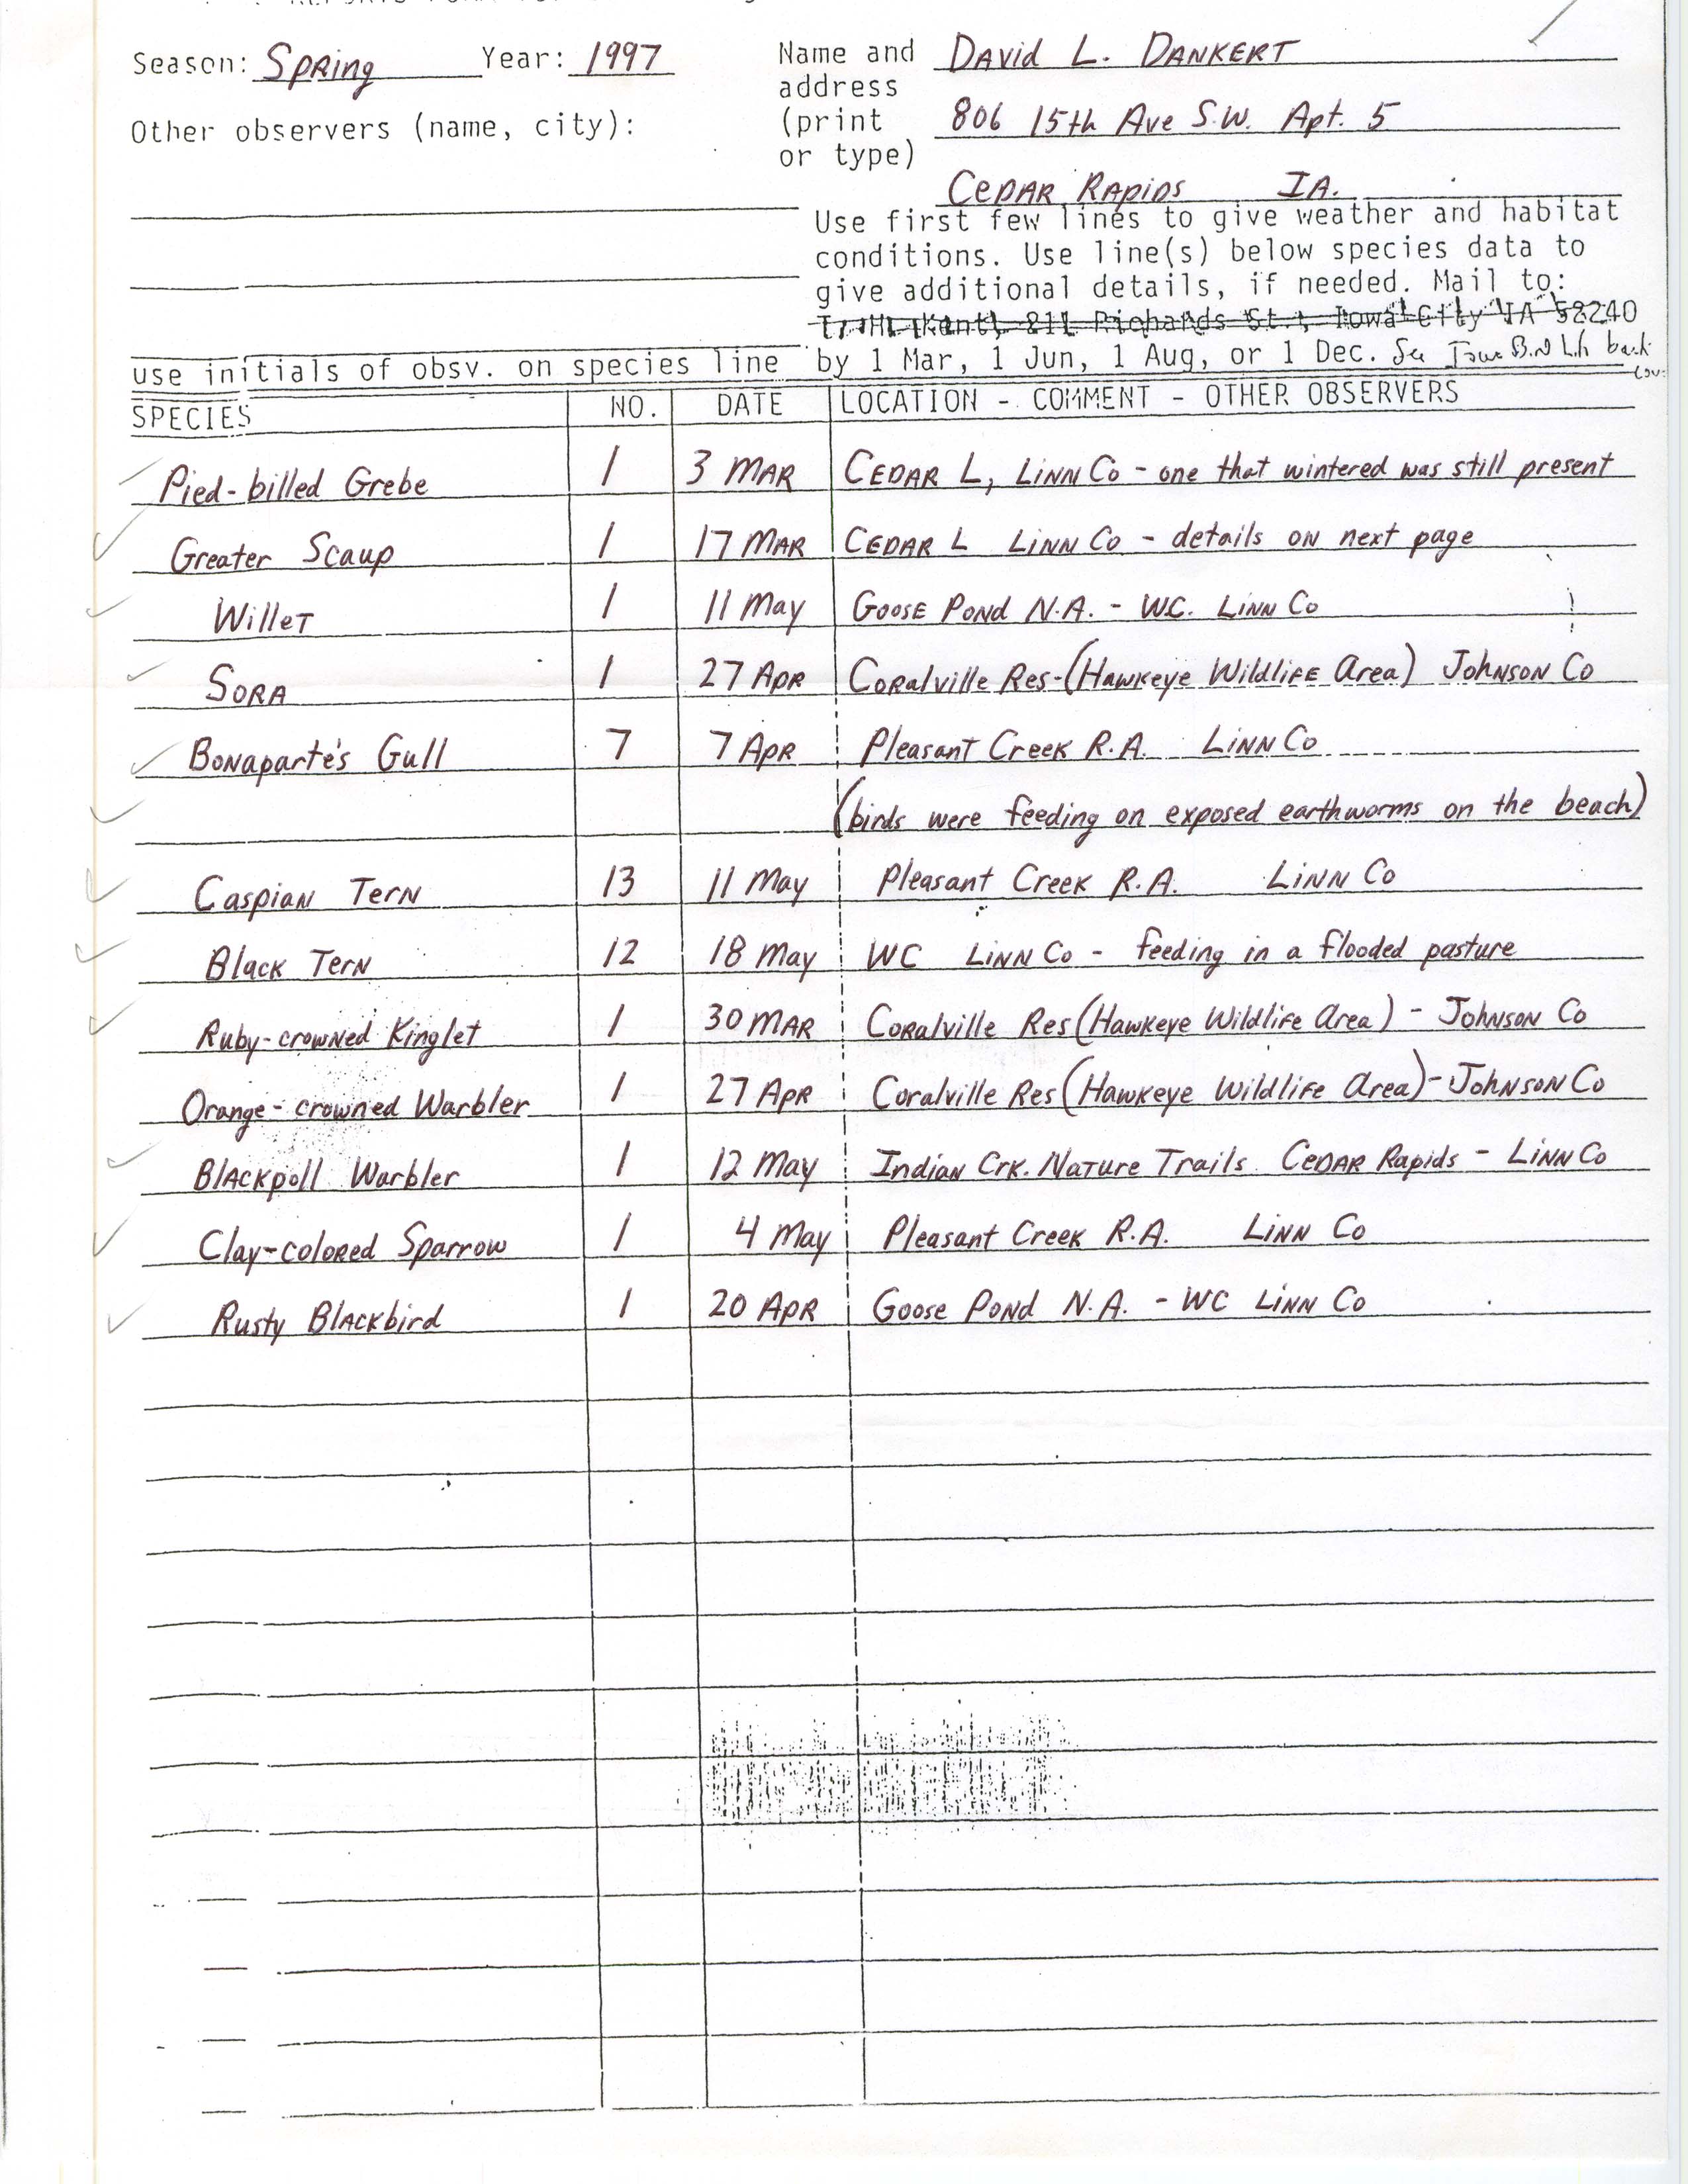 Field reports form for submitting seasonal observations of Iowa birds, David L. Dankert, spring 1997